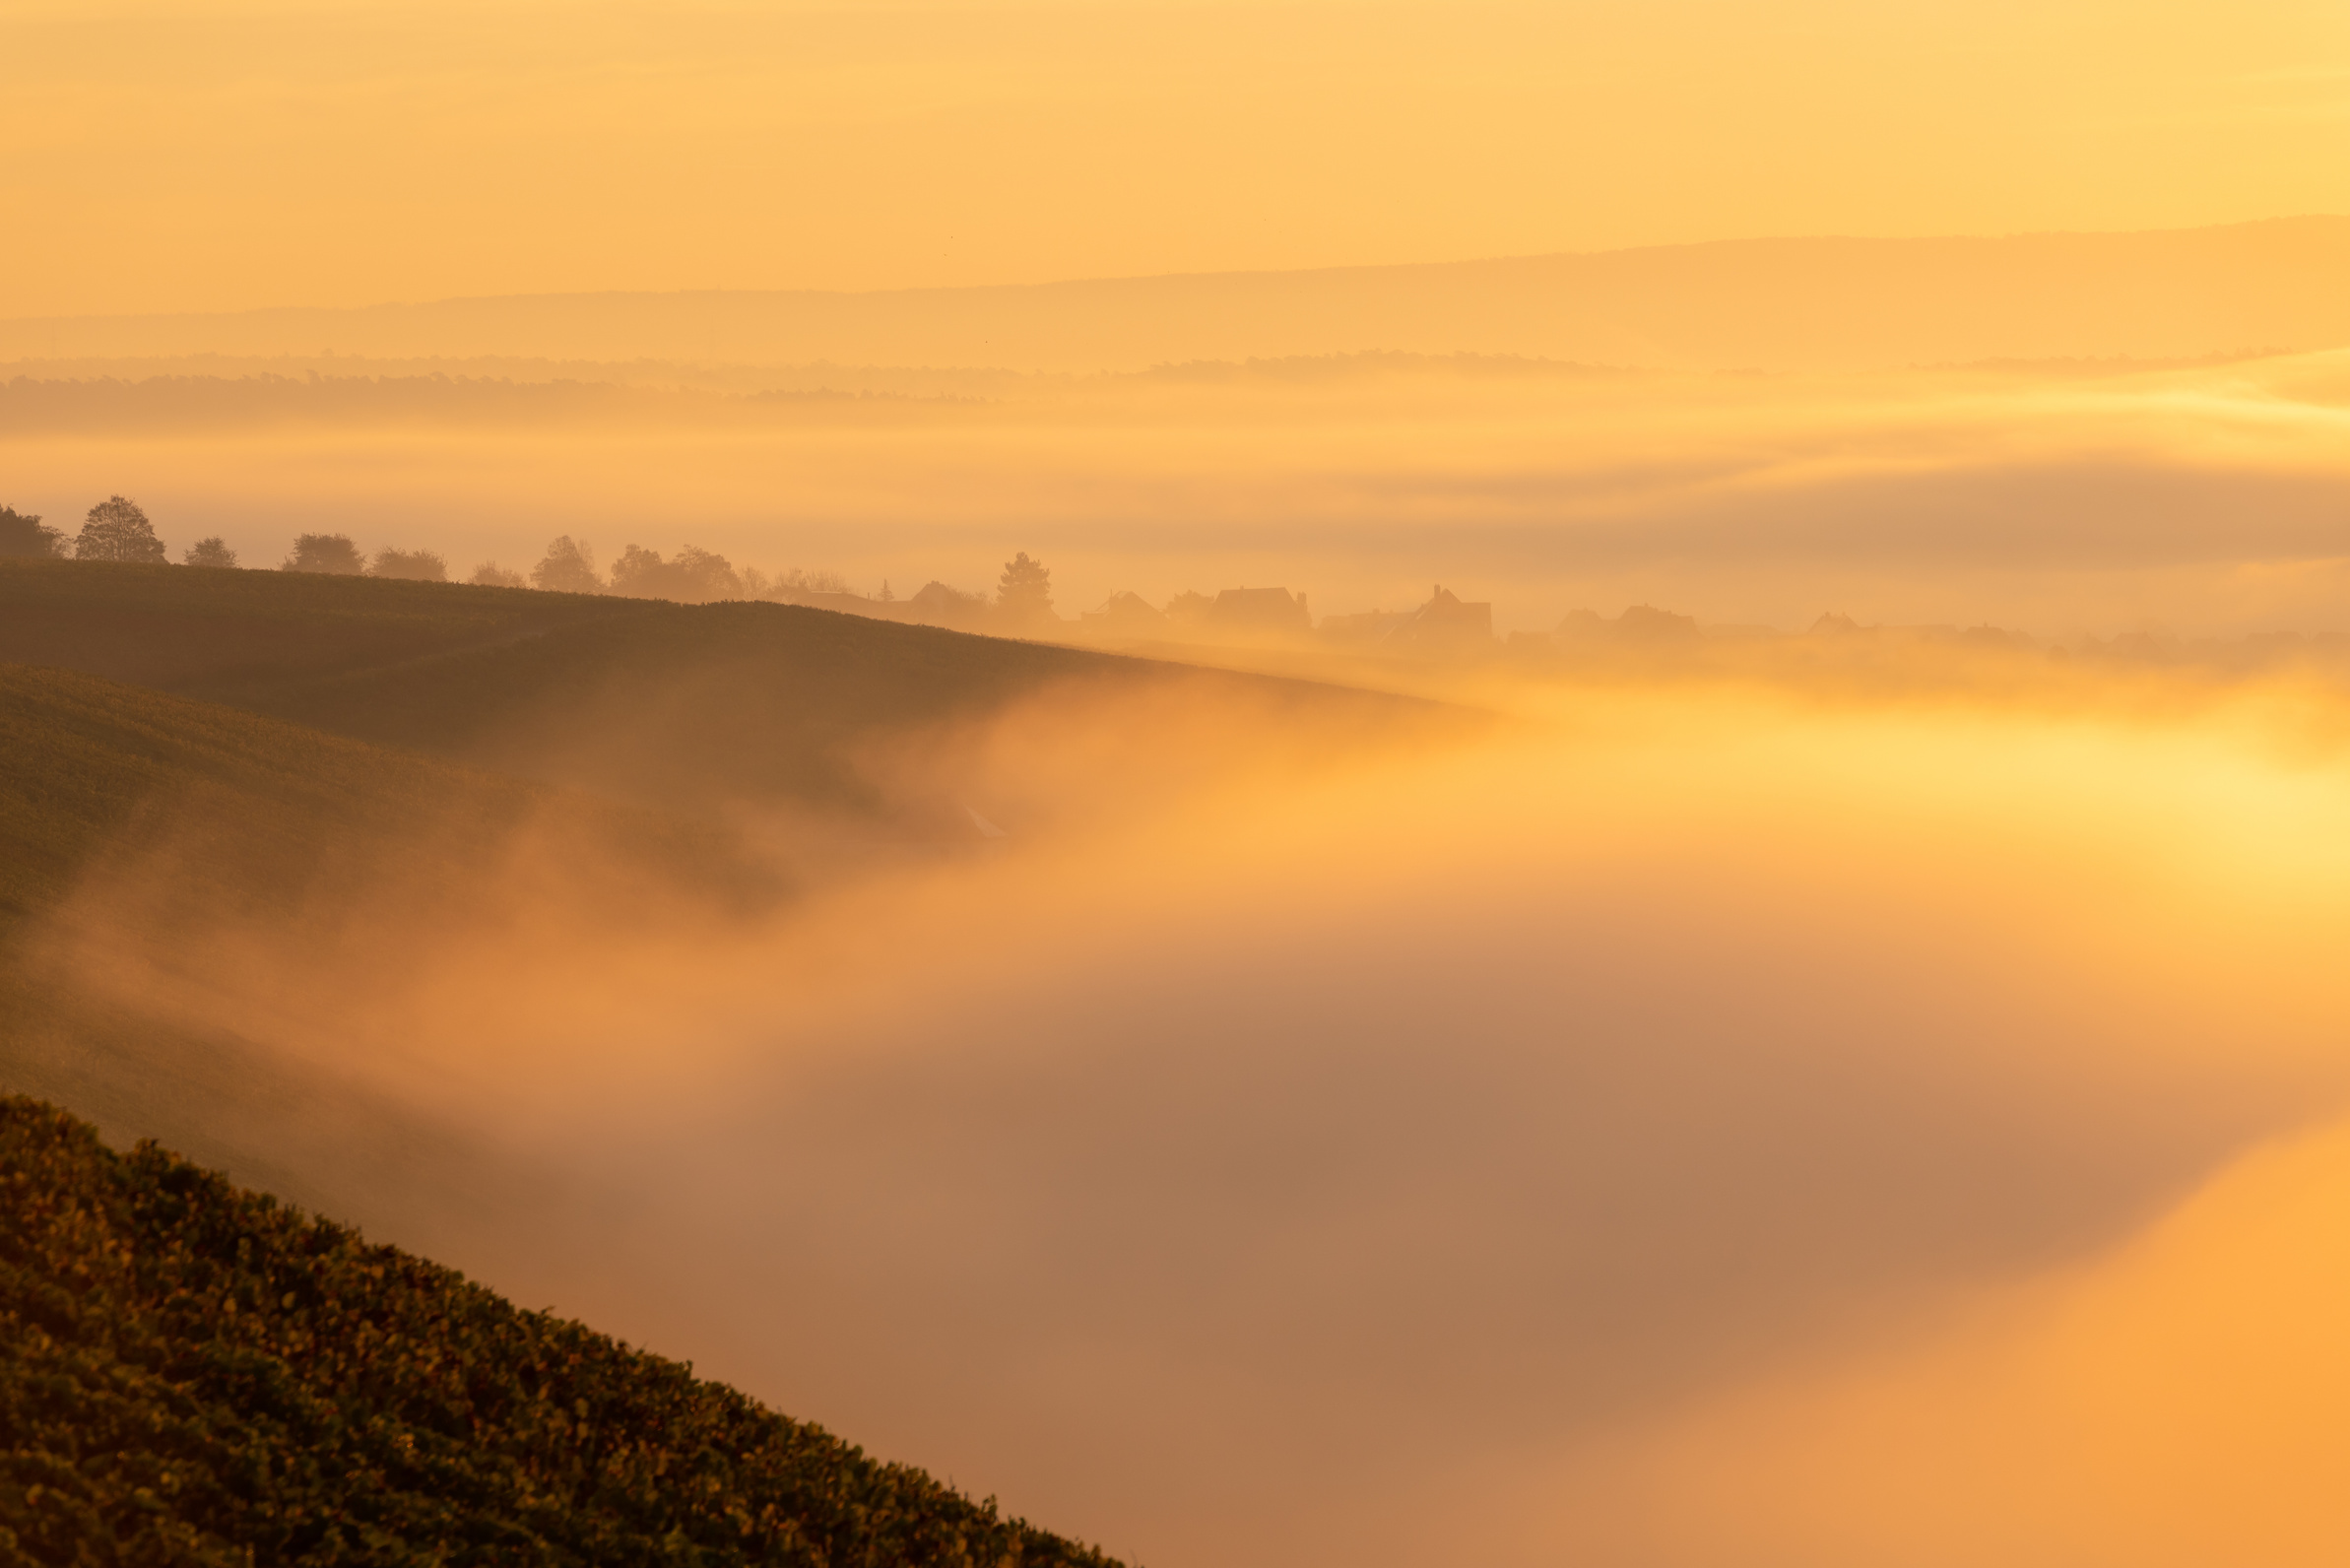 Rising sun in the vineyards over the early morning fog over Main river